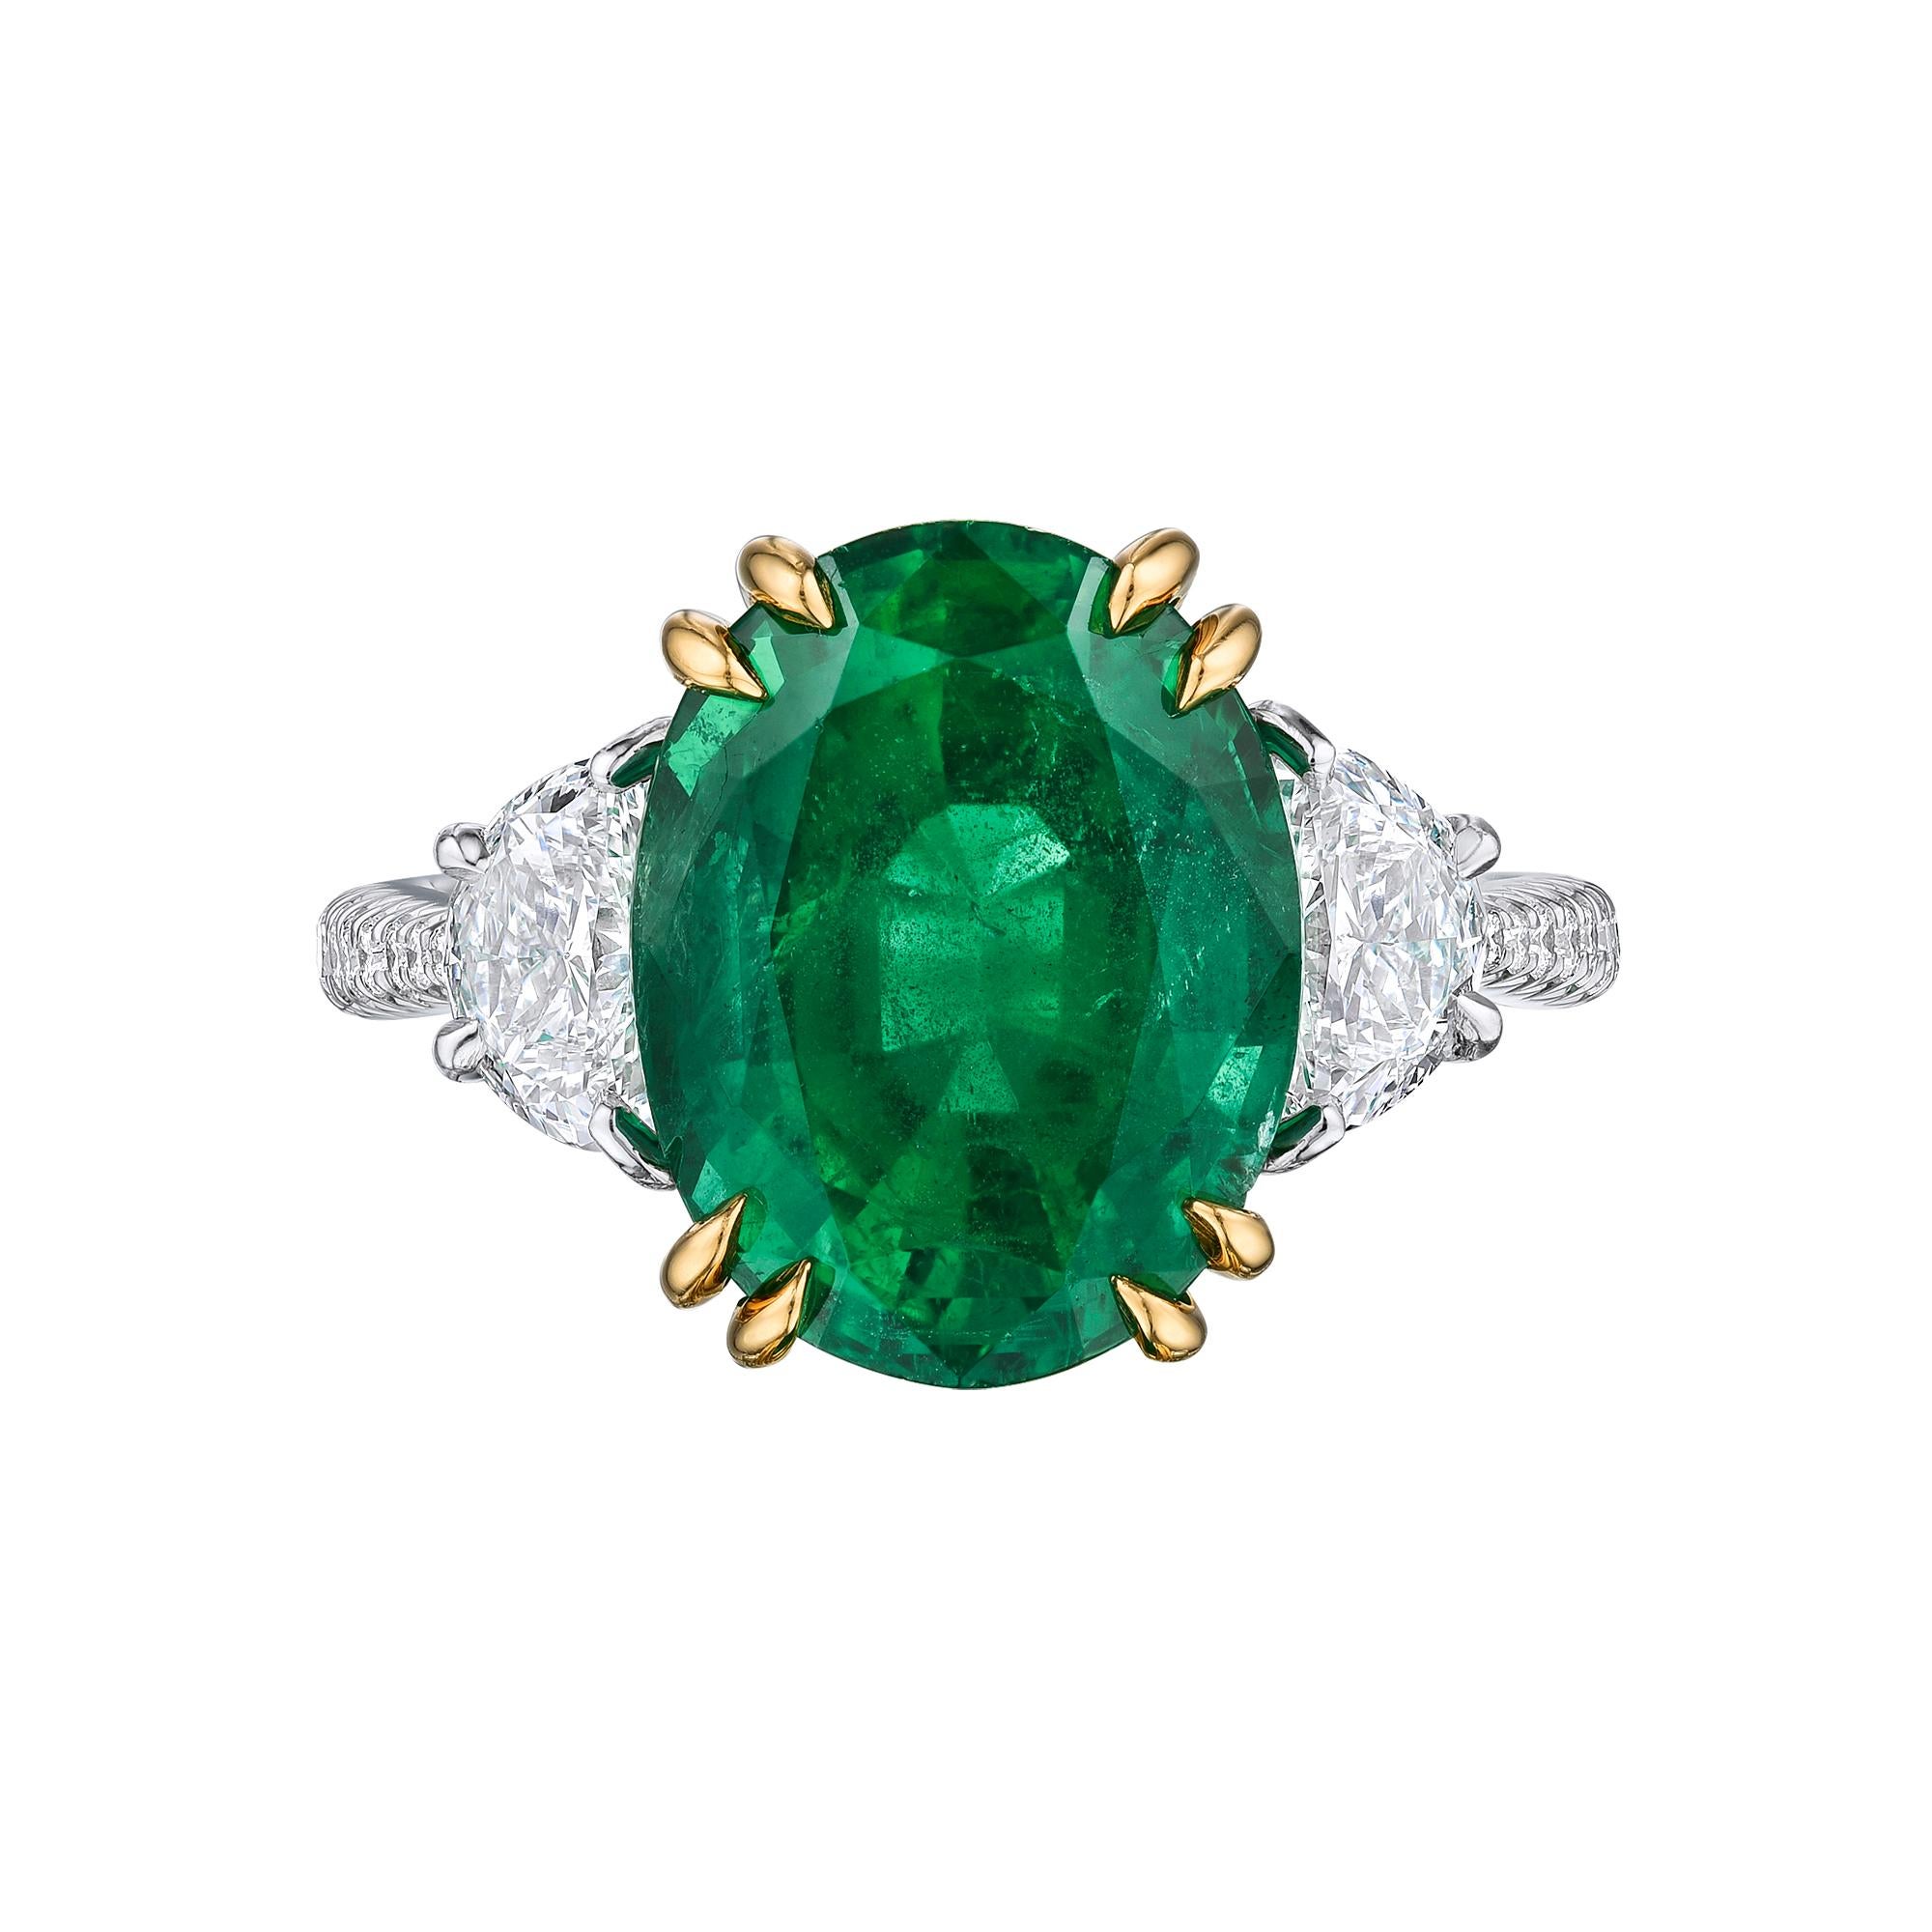 Oval Green Emerald Cocktail Ring set in Platinum with 18K yellow gold prongs. 5.72 Intense green Emerald stone set in platinum with half moon and brilliant round cut diamonds. Center stone is 5.72 carats, side stones: 1.20 carats F-G Vs1_Vs2. Total